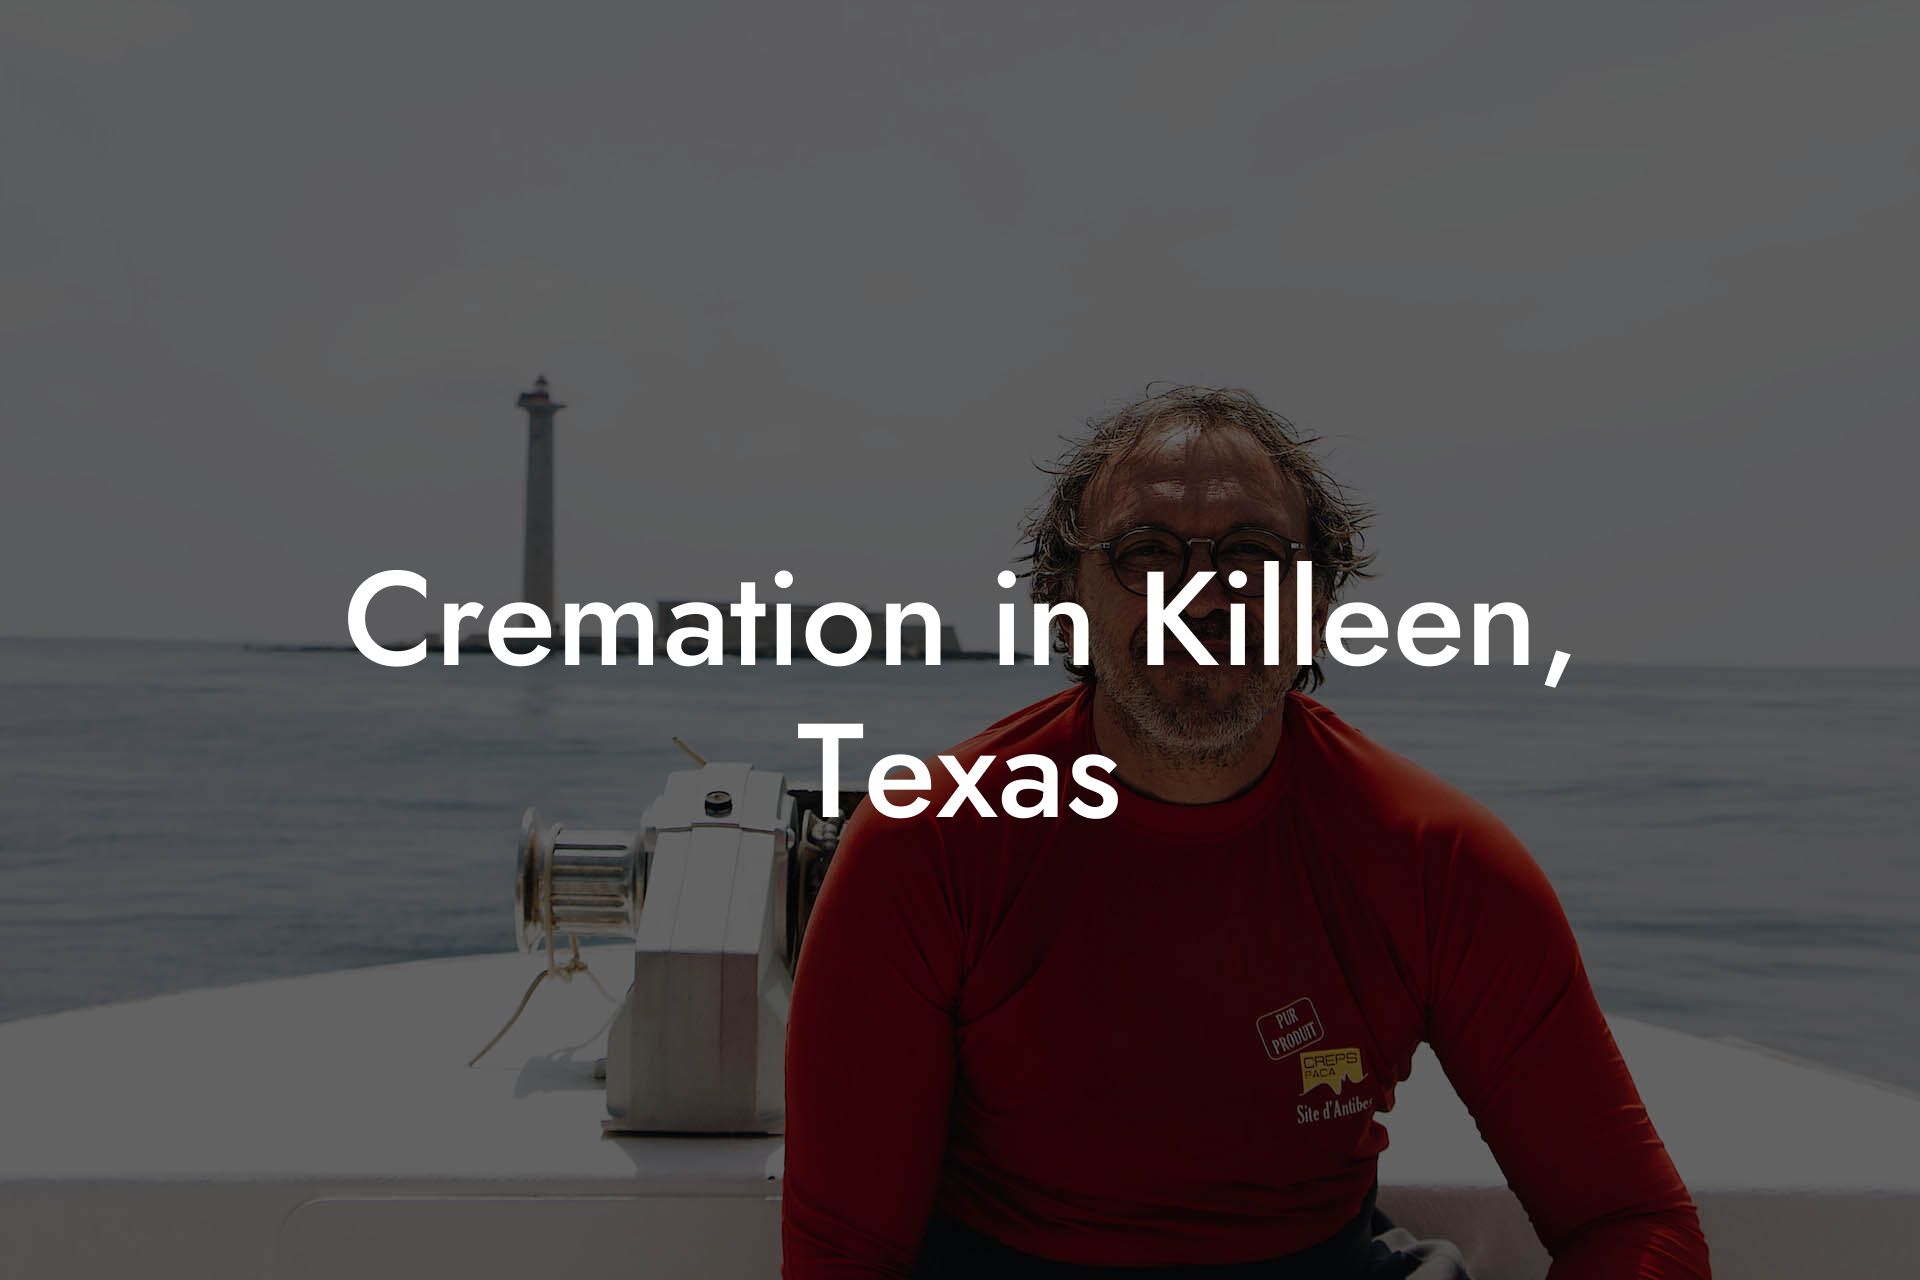 Cremation in Killeen, Texas